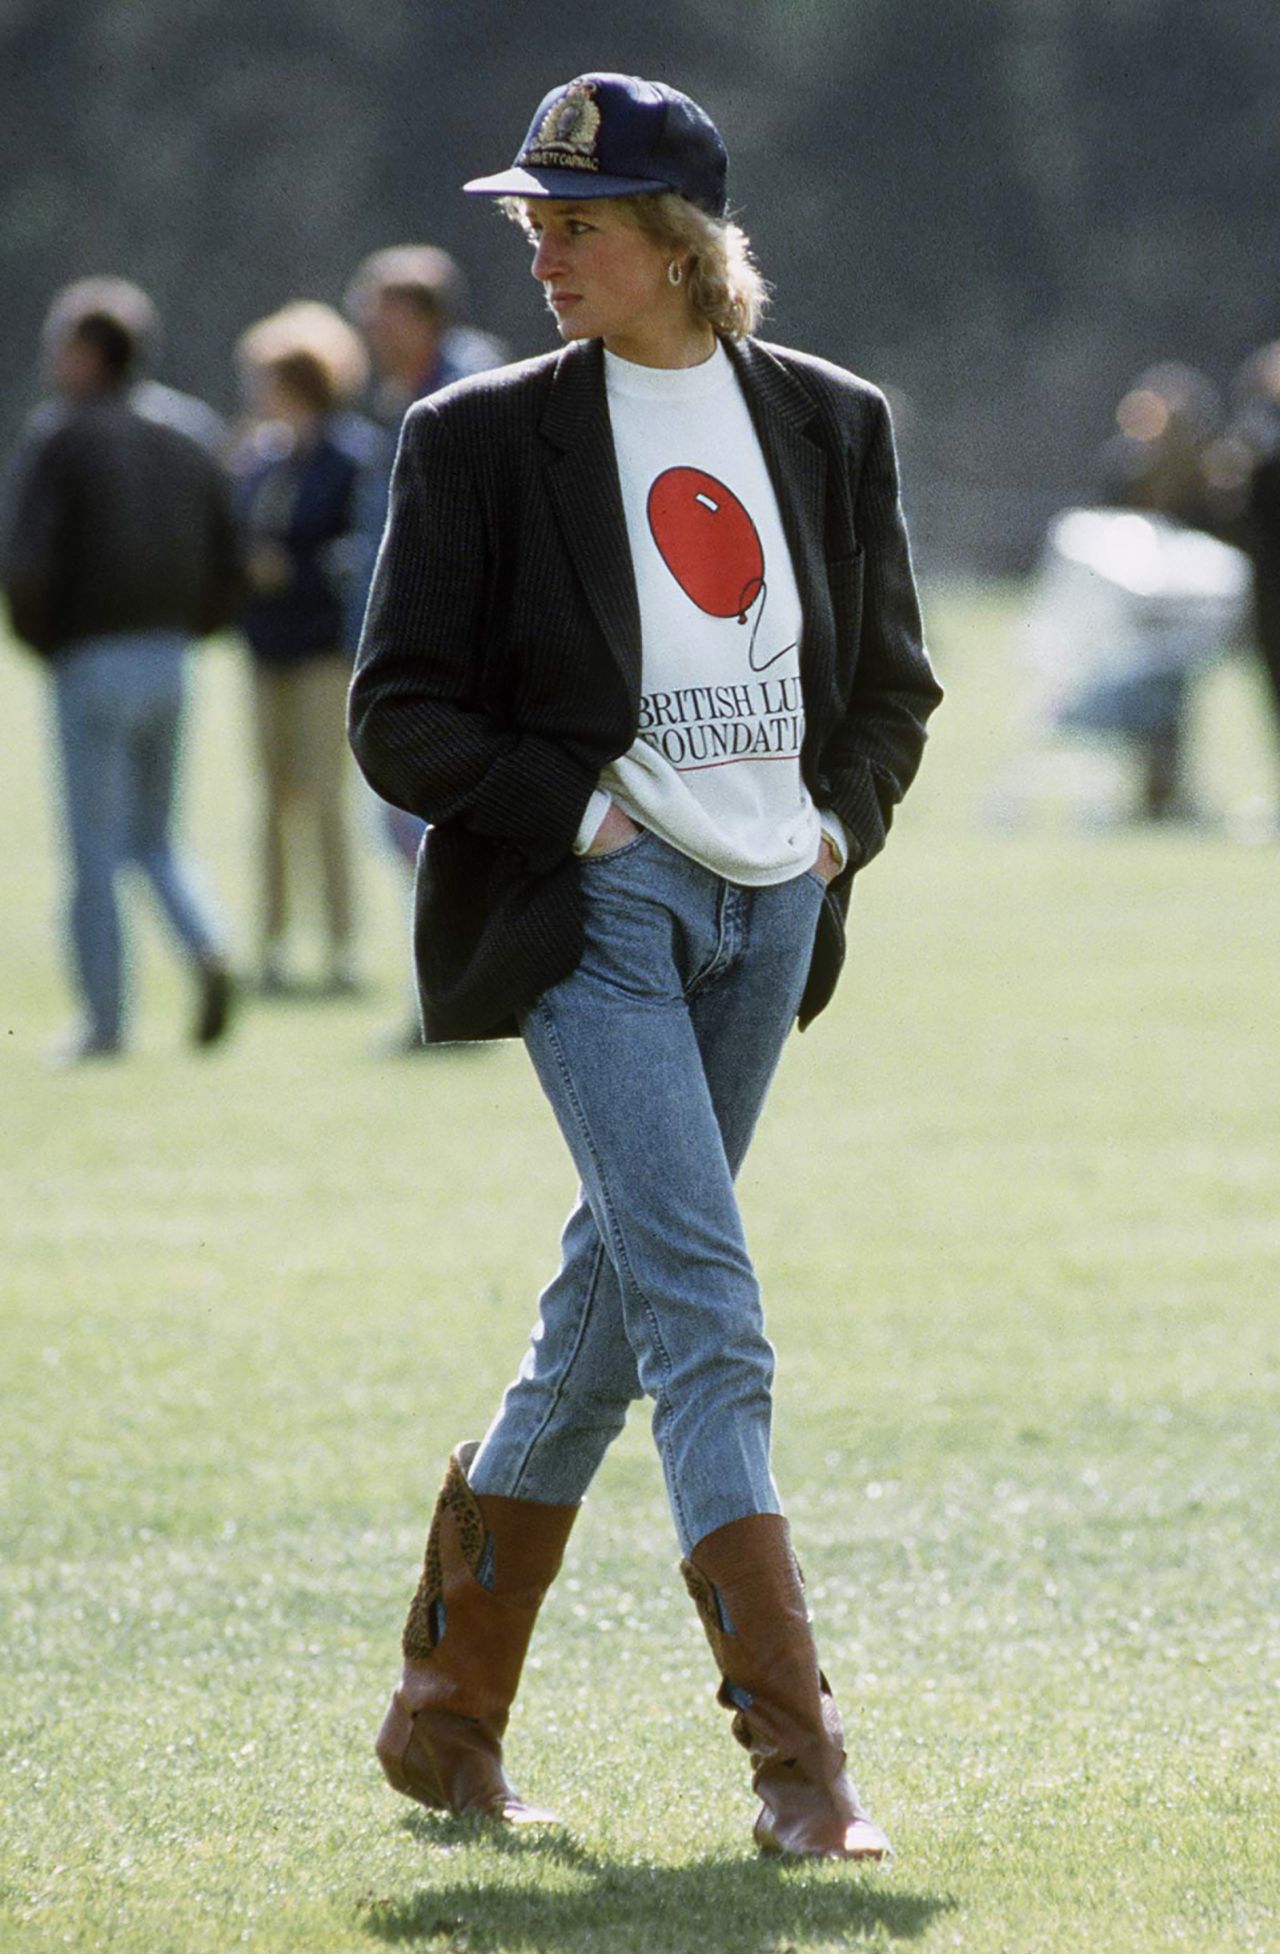 Princess Diana is pictured attending a game at the Guards Polo Club in Windsor, England. In an outfit that defined her style in the 1980s, she is dressed casually in a sweatshirt with The British Lung Foundation's logo under a boxy corduroy jacket and paired with jeans, boots and a baseball cap.